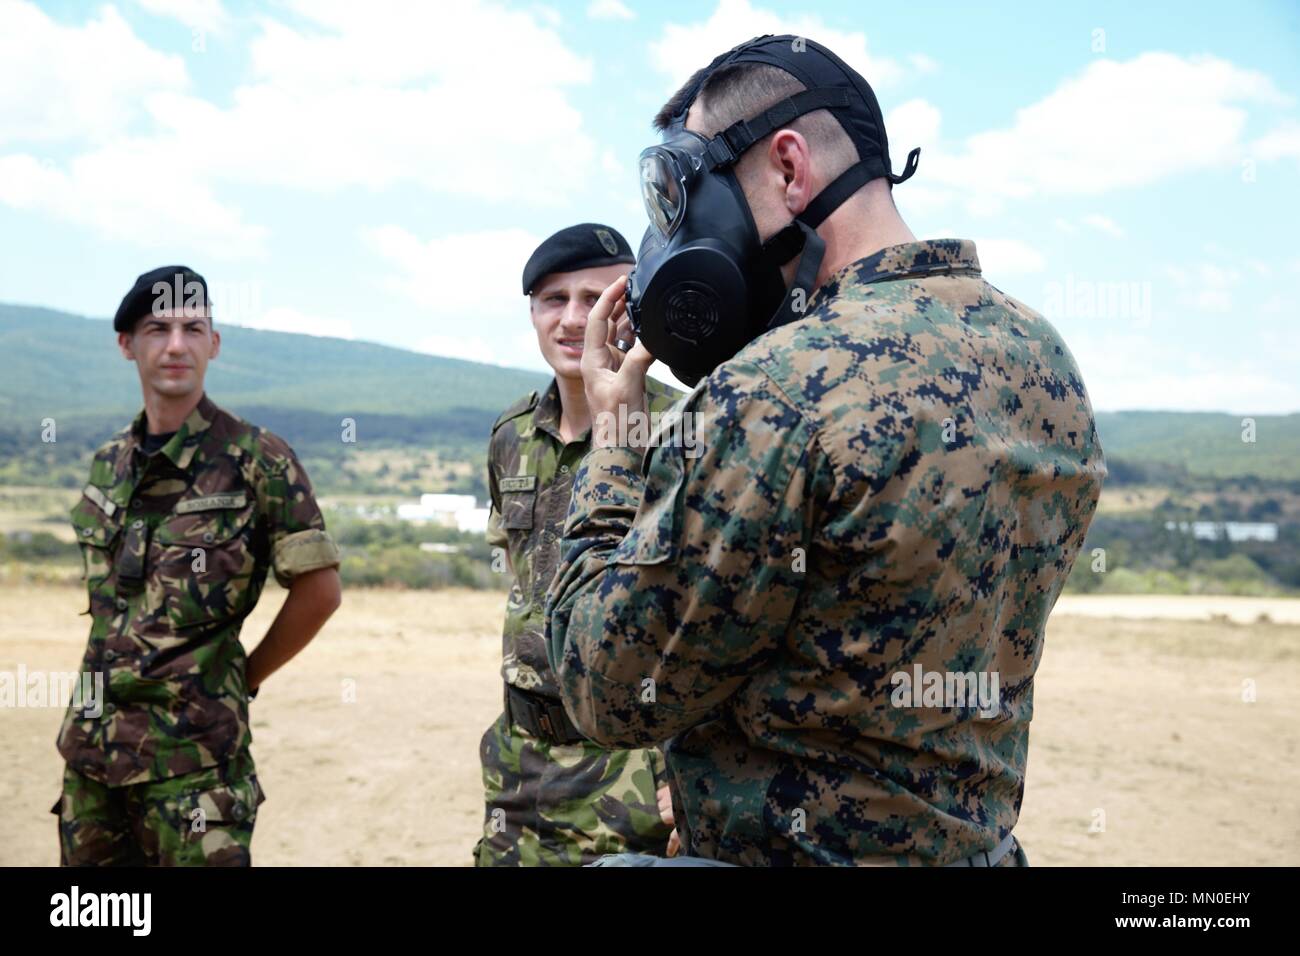 A U.S. Marine with Black Sea Rotational Force 17.1 teach the Romanian military how to properly don the M50 gas mask aboard Novo Selo Training Area, Bulgaria, Aug. 2, 2017. This range was a part of Exercise Platinum Lion 17.2, a multinational exercise to build relationships with NATO Allies and partner nations through combined arms training. (U.S. Marine Corps photo by Sgt. Patricia A. Morris) Stock Photo